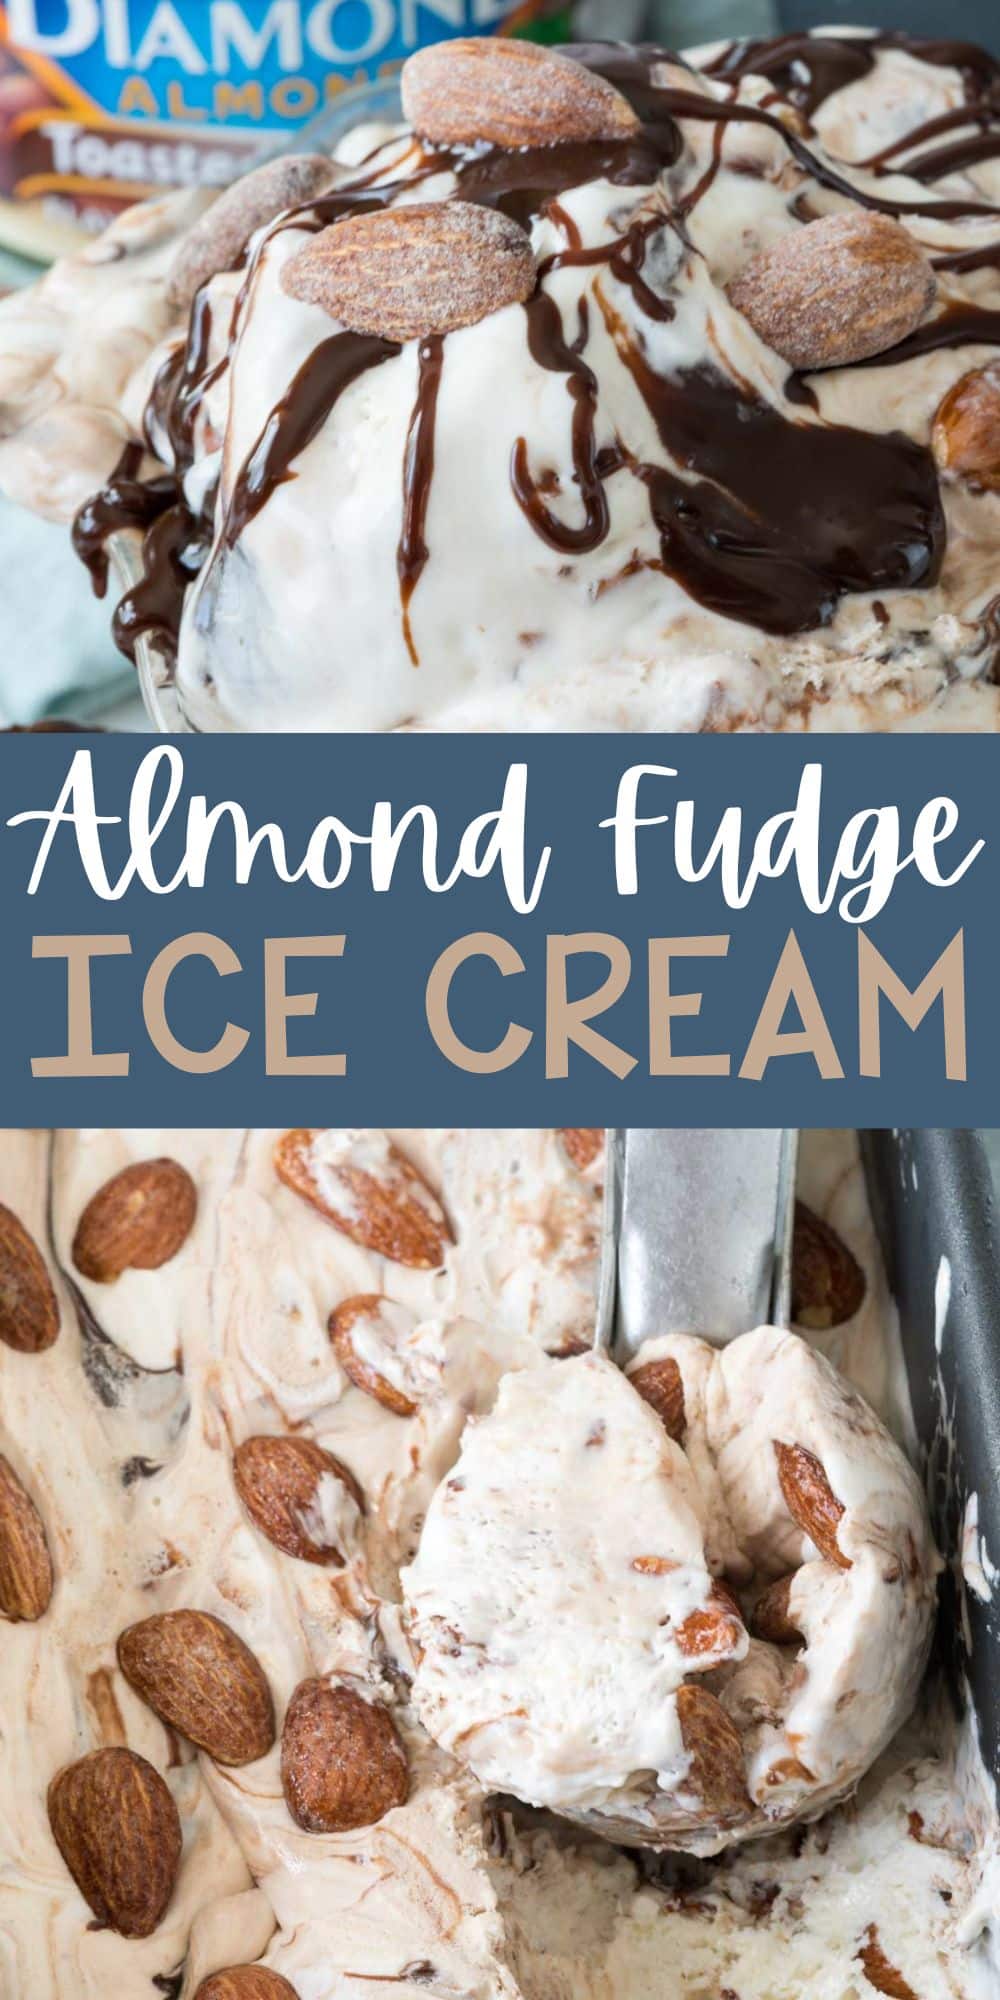 two photos of ice cream covered in chocolate syrup and almonds with words on the image.